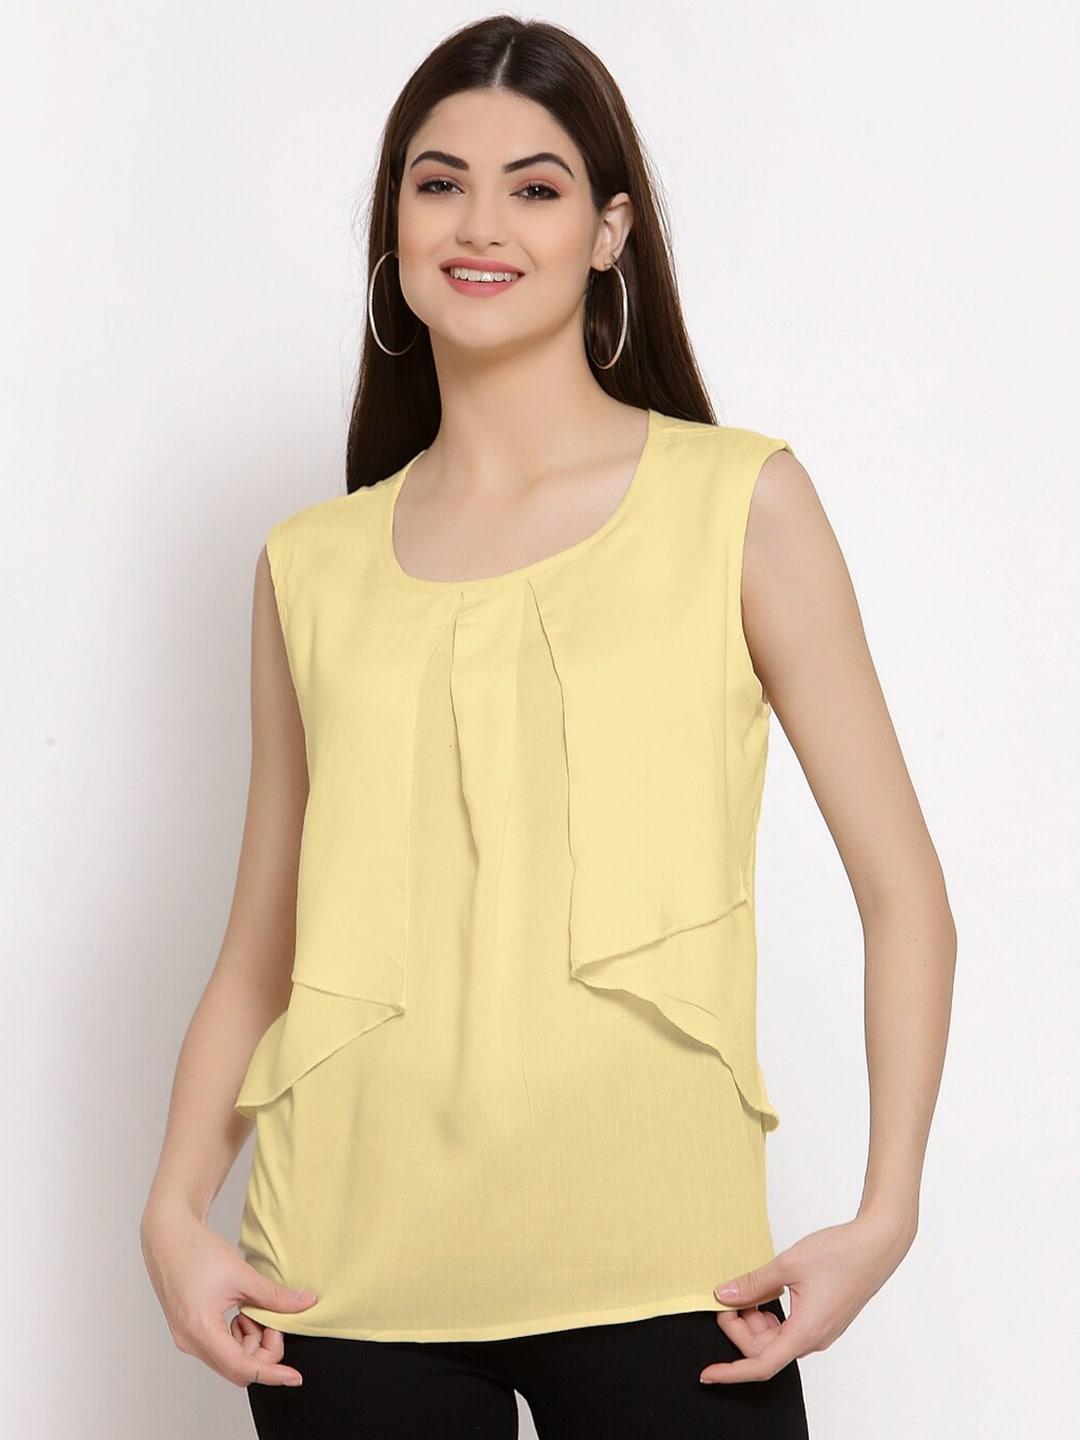 patrorna-gold-toned-solid-layered-top